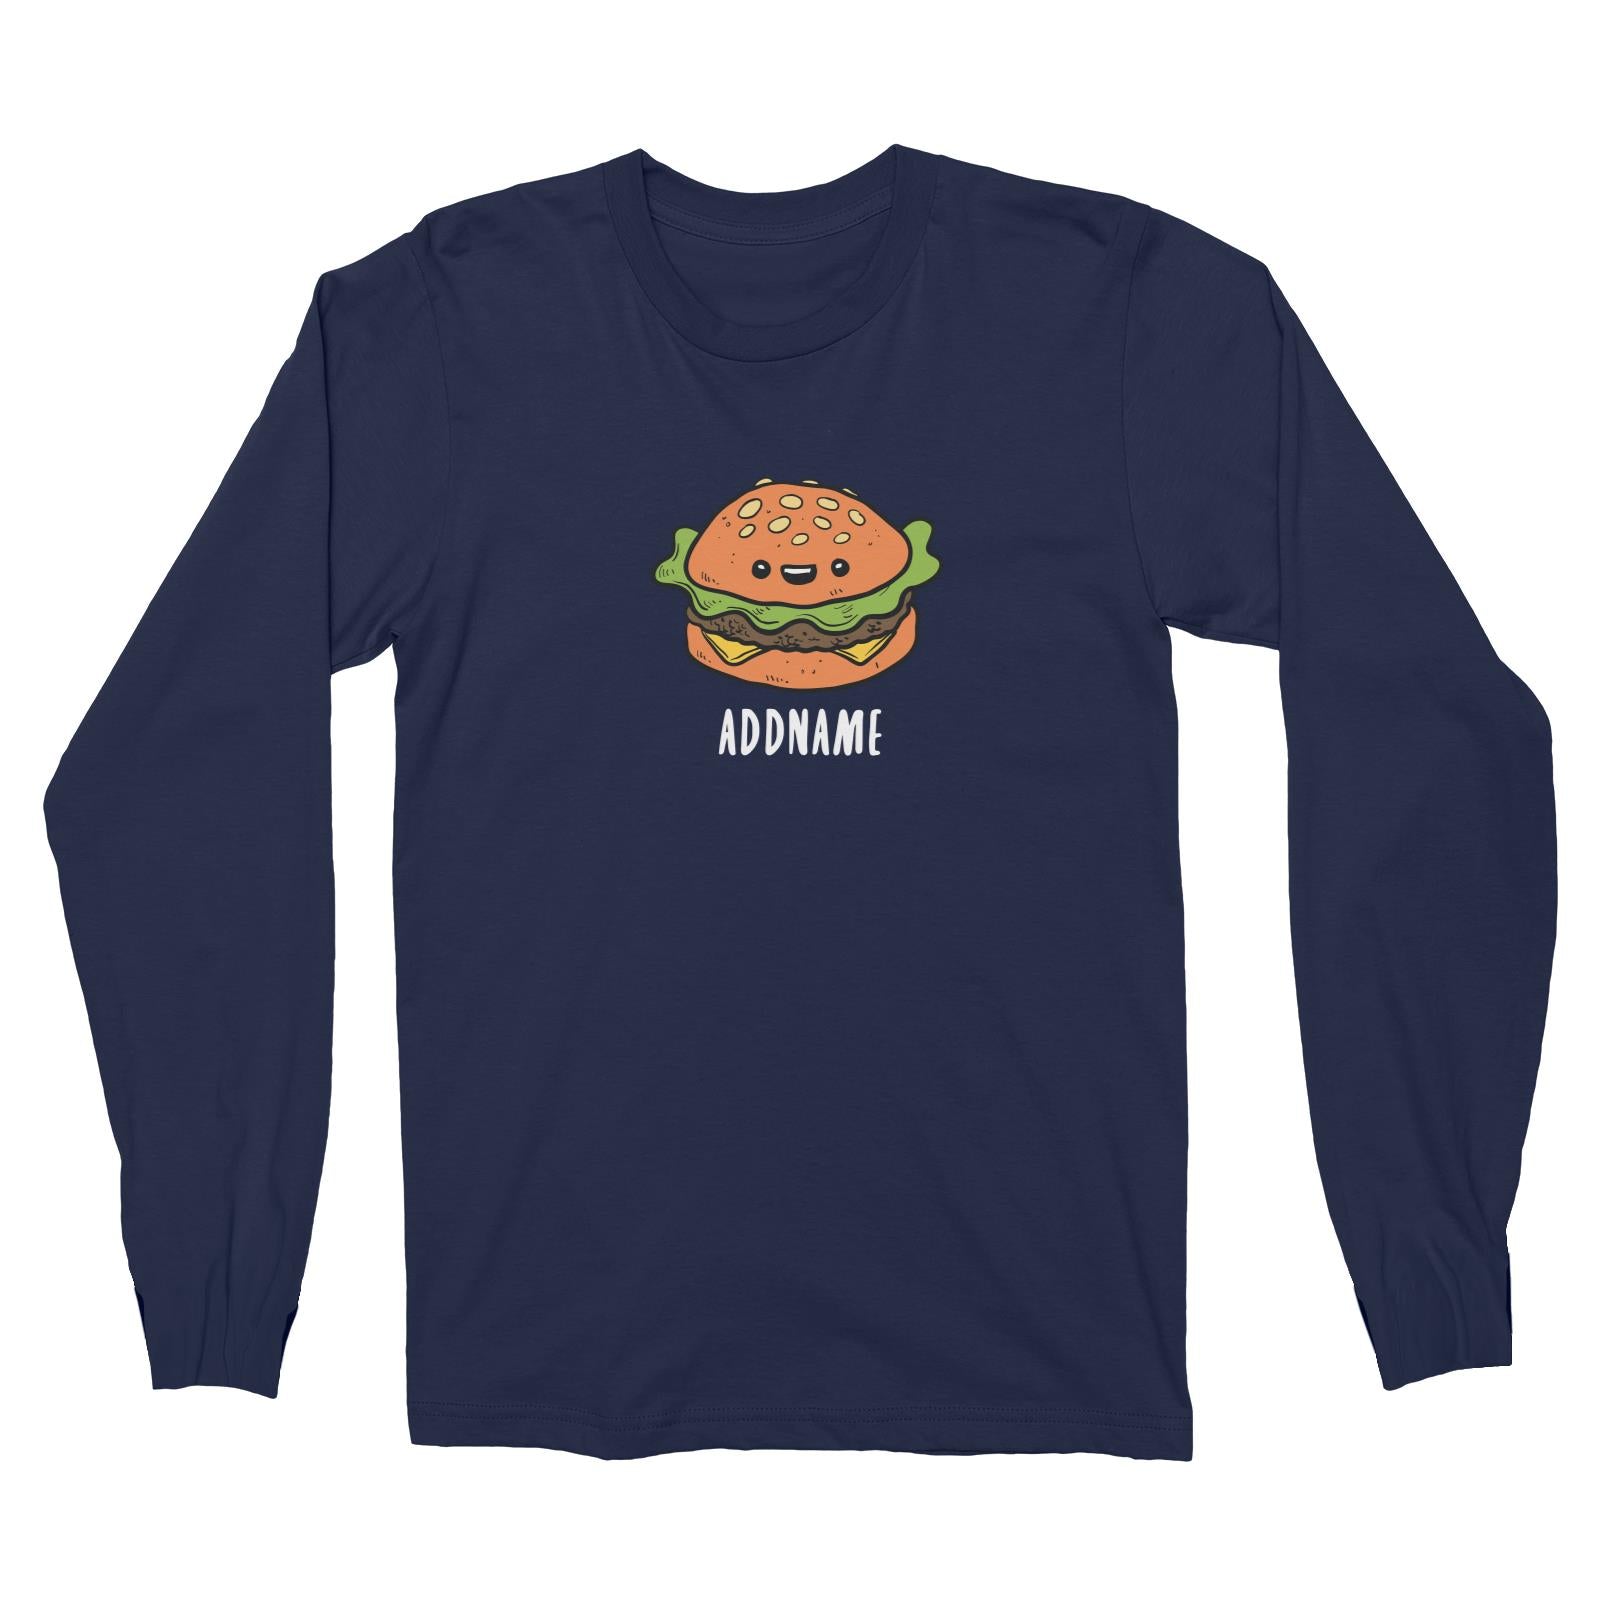 Fast Food Burger Addname Long Sleeve Unisex T-Shirt  Matching Family Comic Cartoon Personalizable Designs